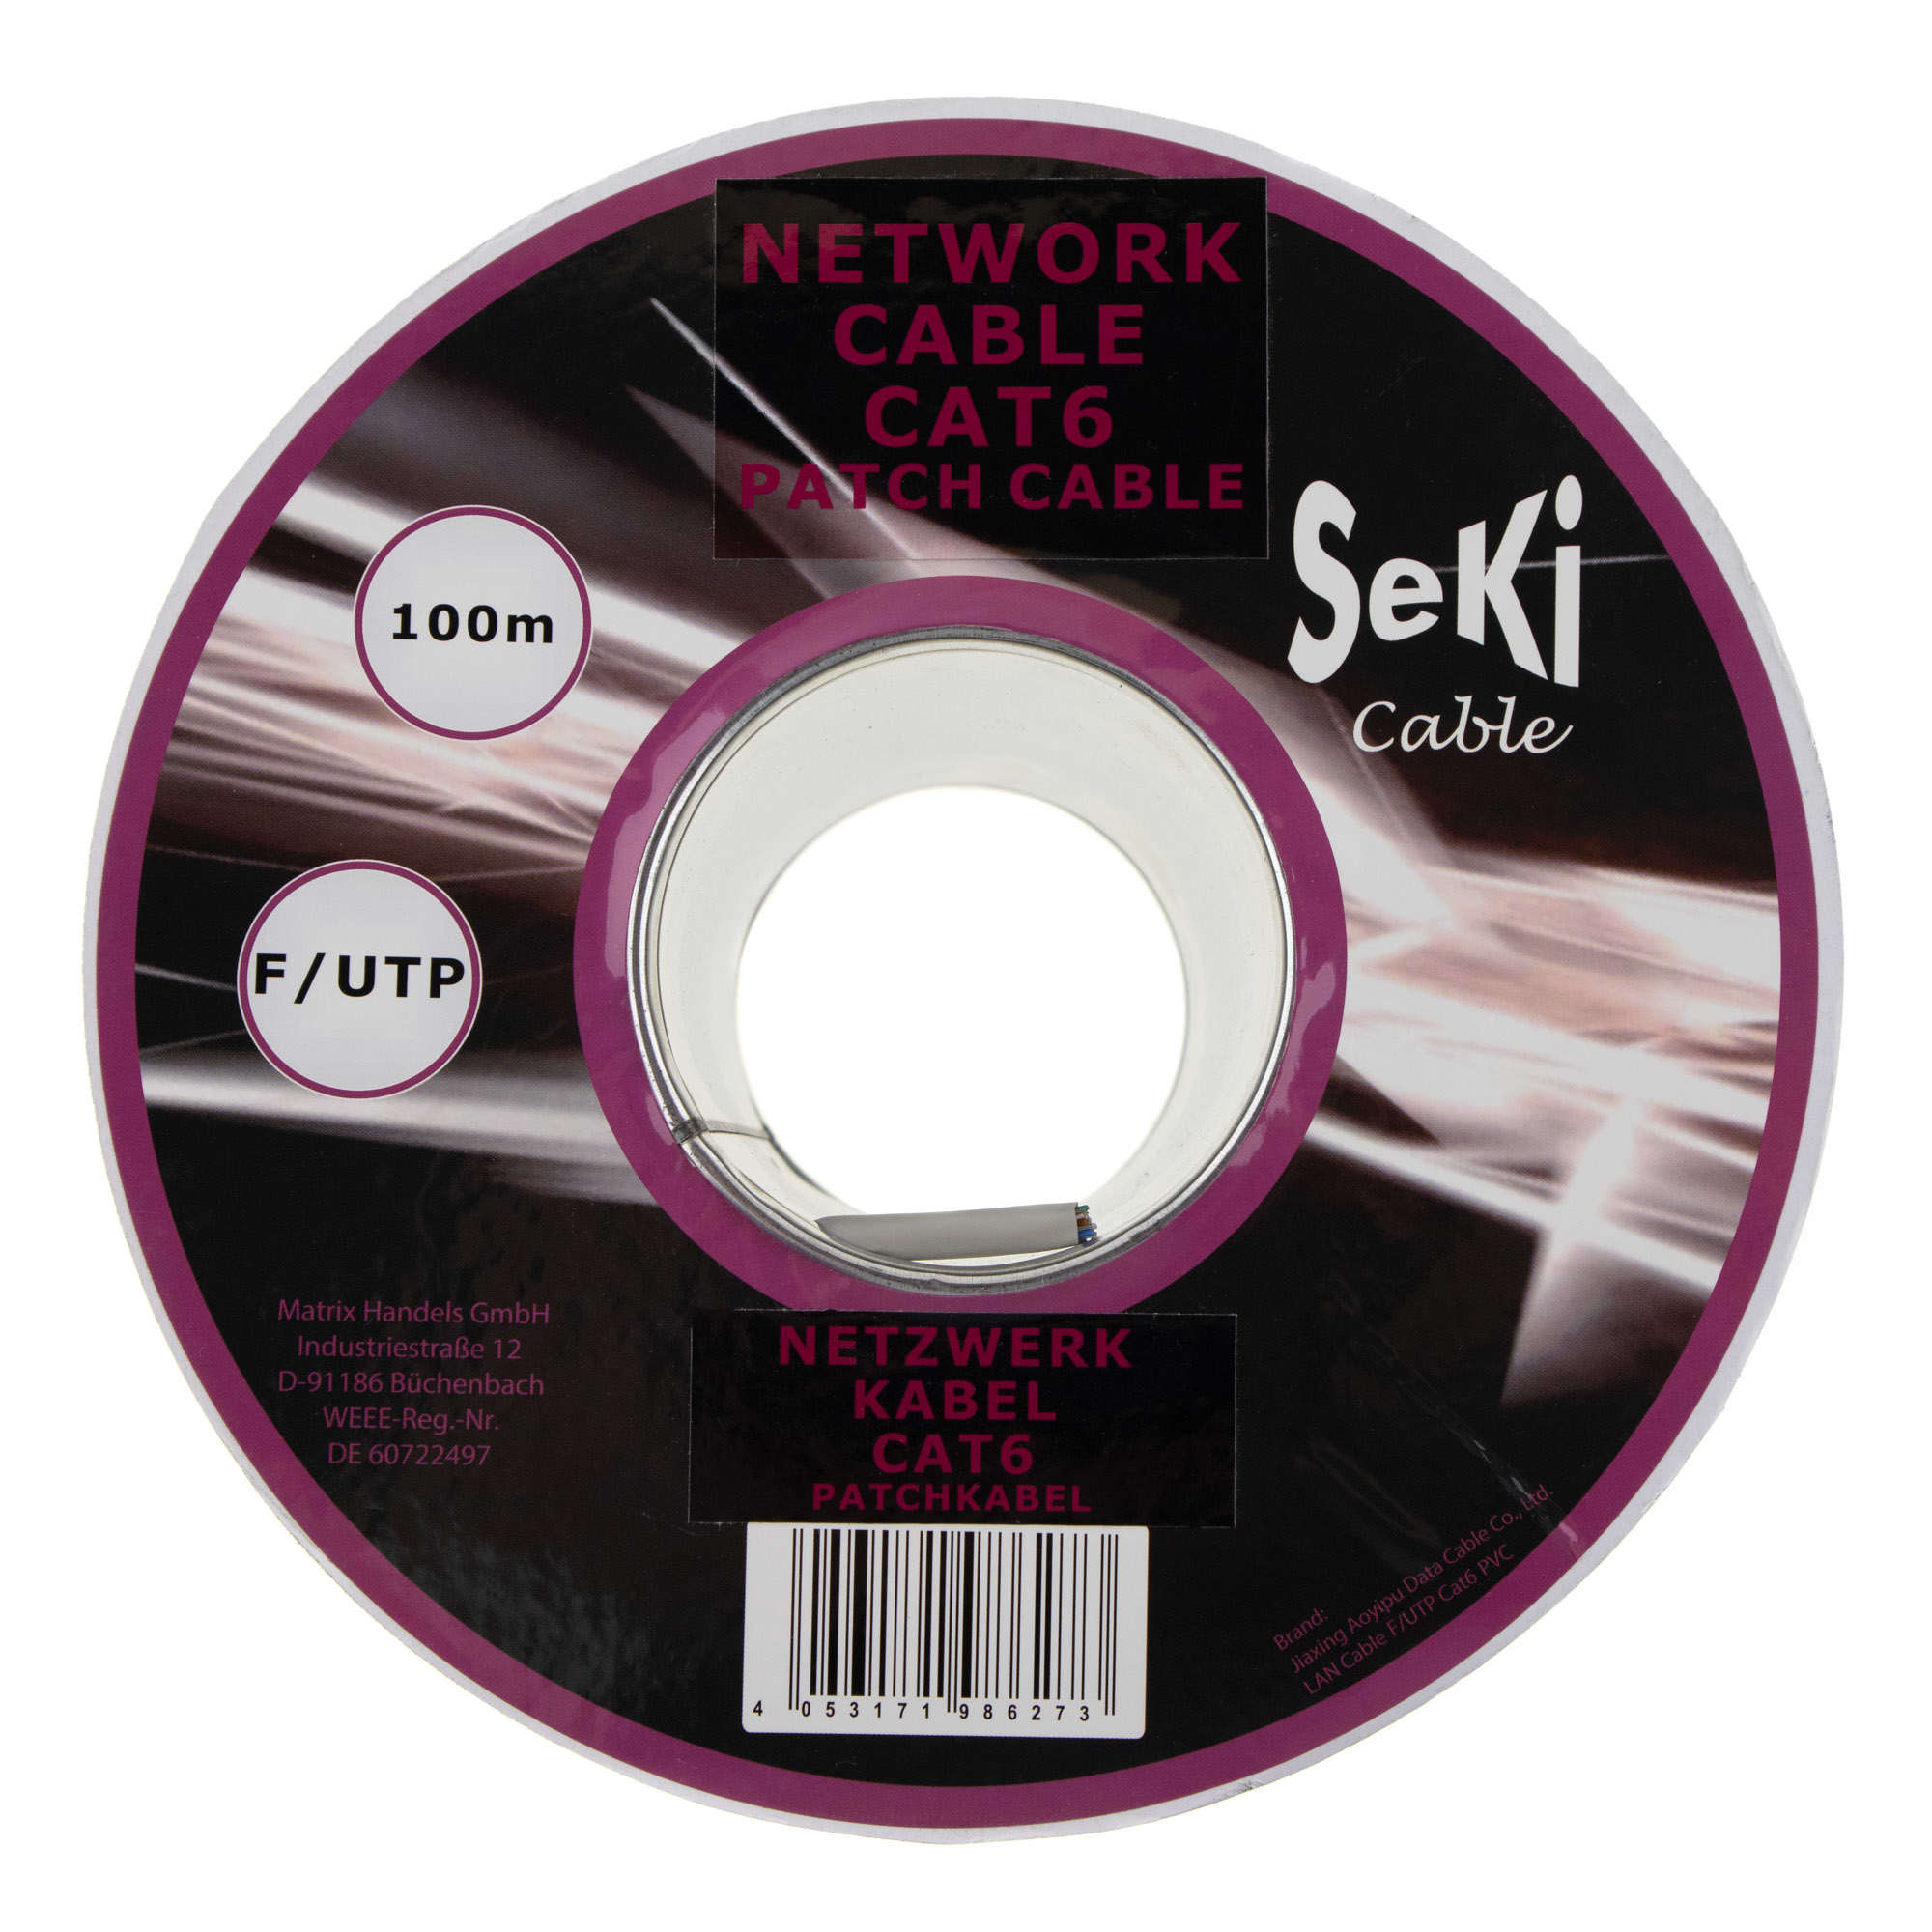 Network cable Cat. 6, 100m